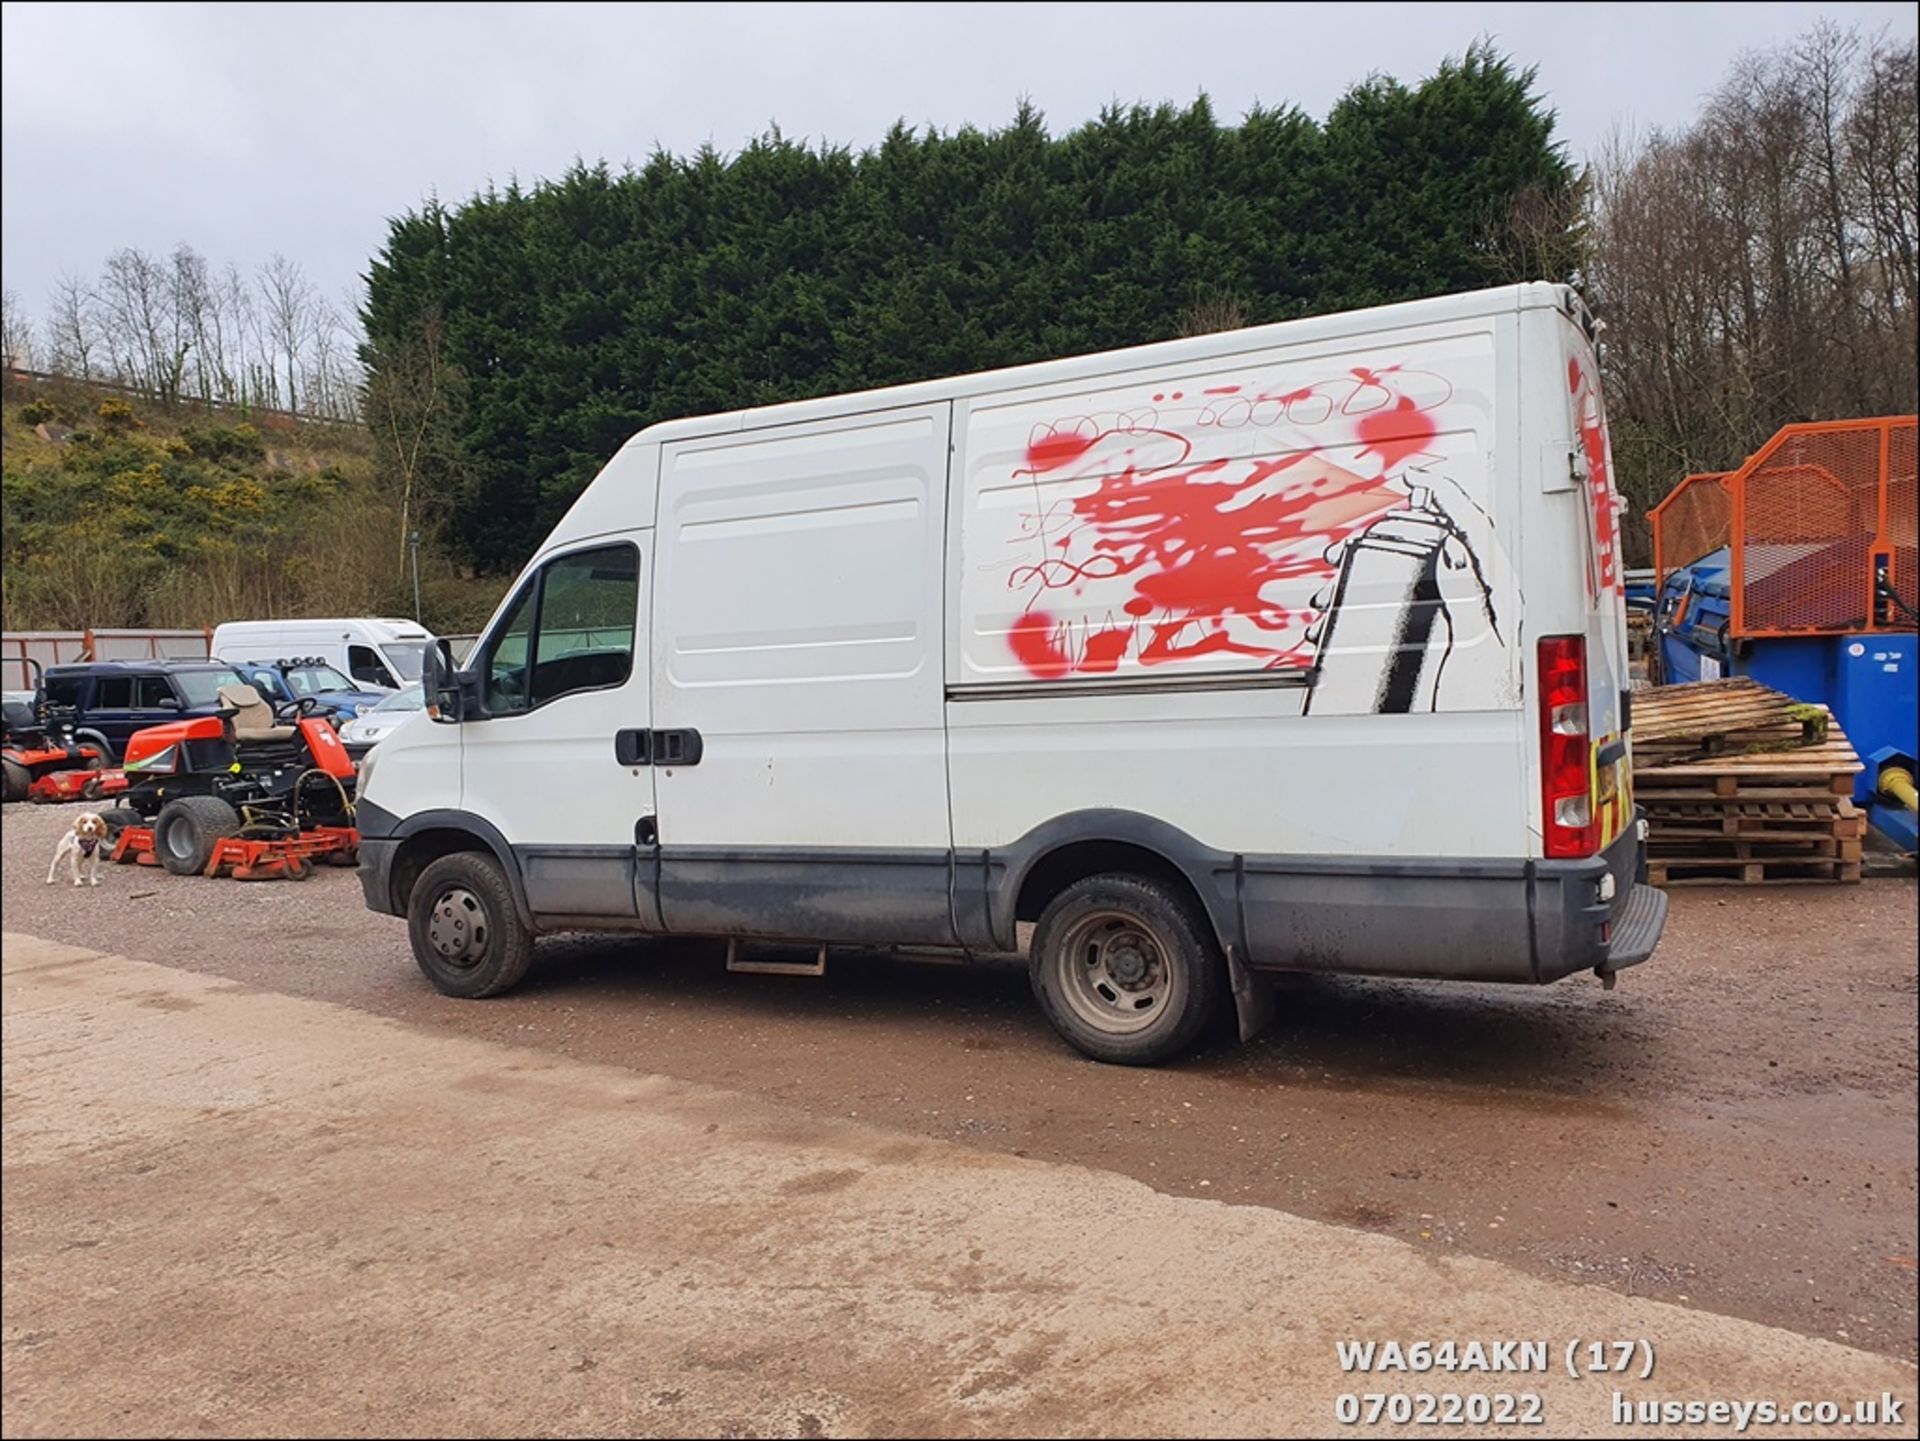 14/64 IVECO DAILY 40C13 - 2287cc 5dr Van (White) - Image 17 of 36